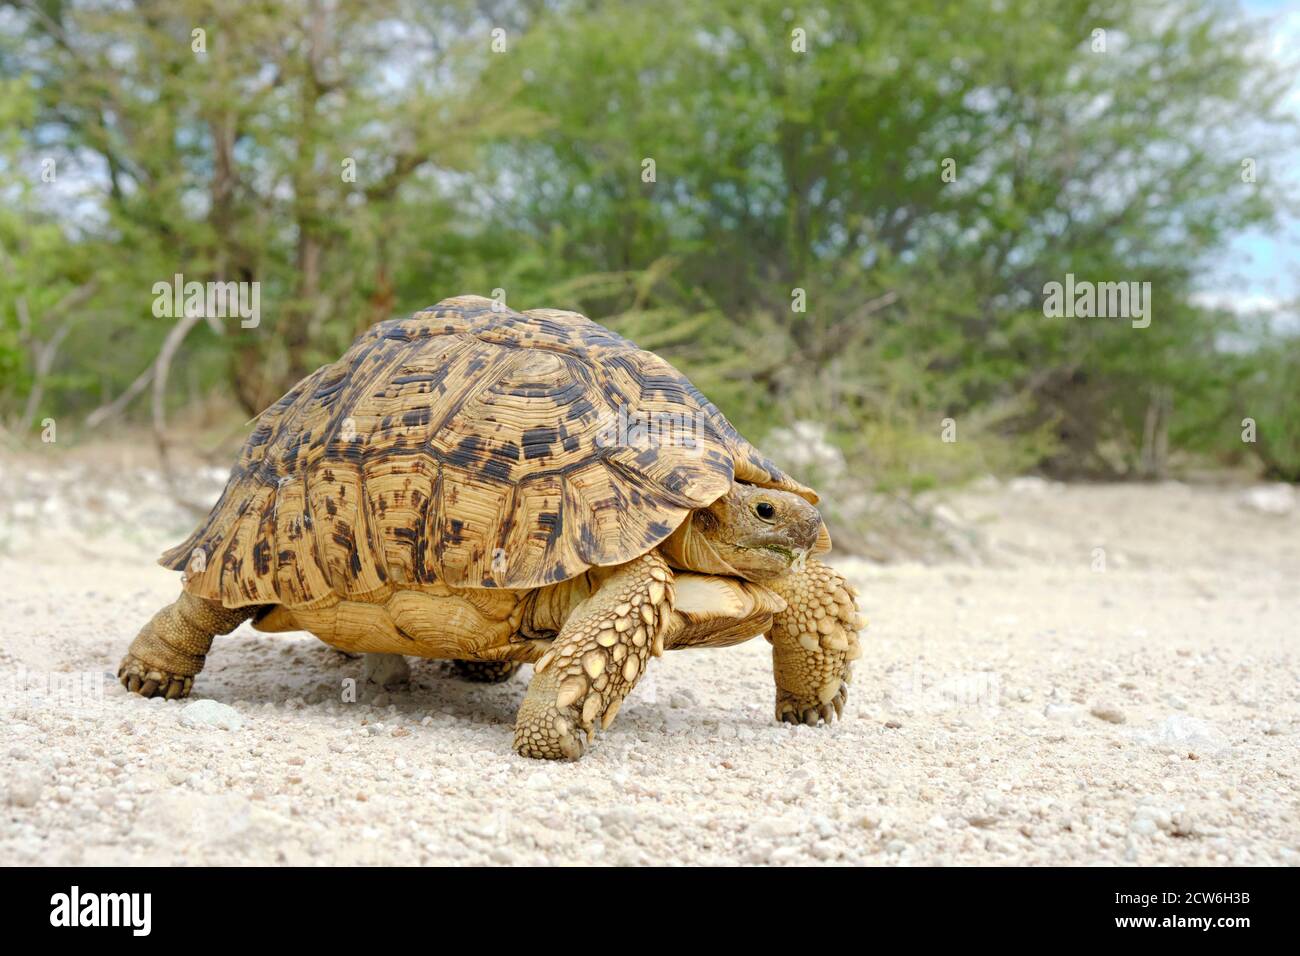 Leopard tortoise, Stigmochelys pardalis, the animal is walking from left to right on white gravel. It has its body lifted from the ground. Stock Photo